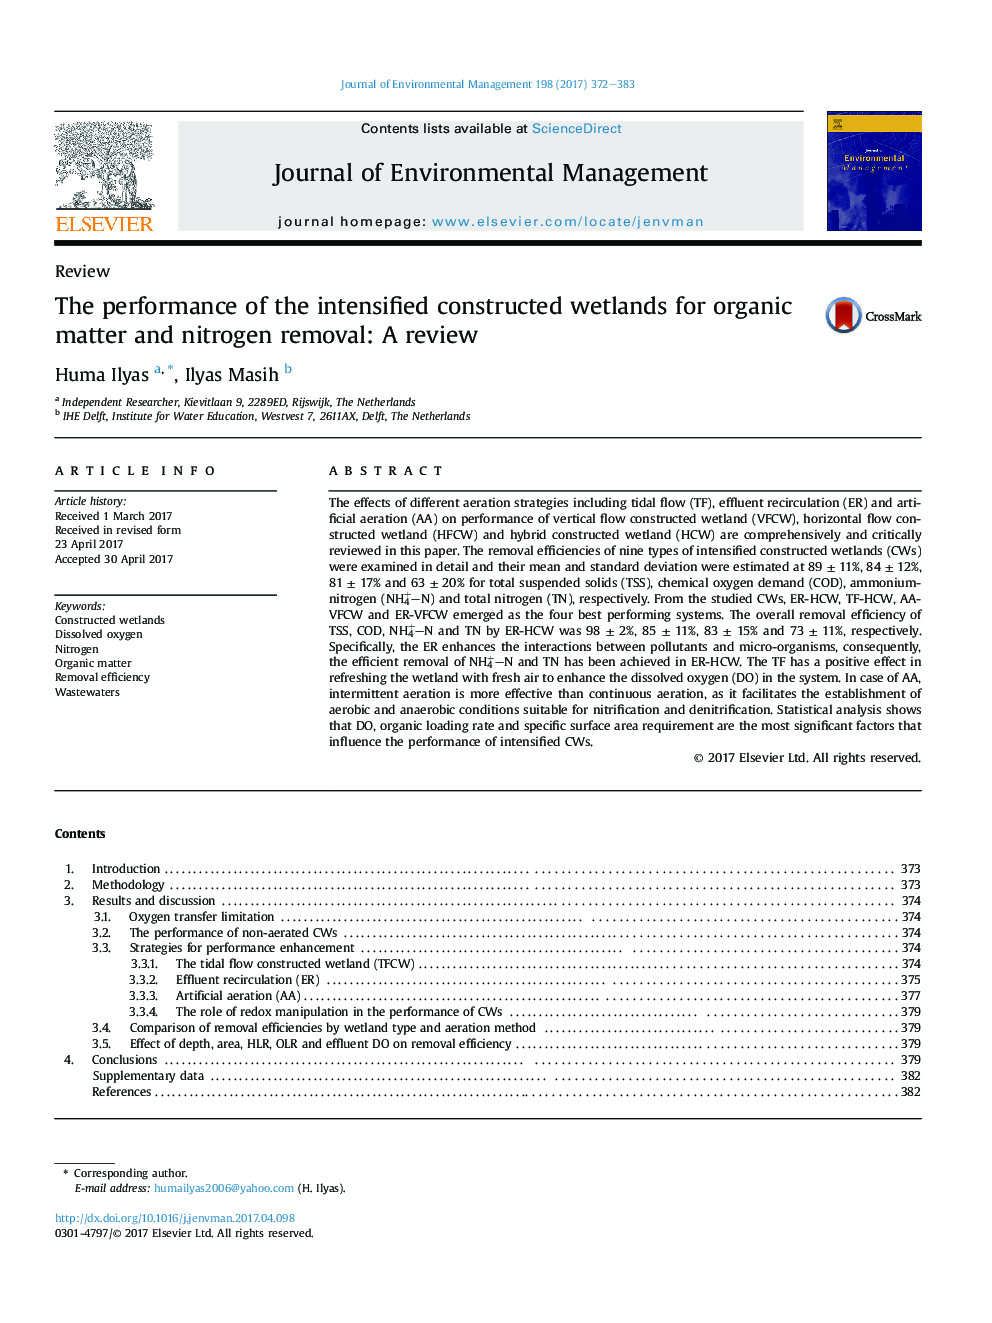 The performance of the intensified constructed wetlands for organic matter and nitrogen removal: A review